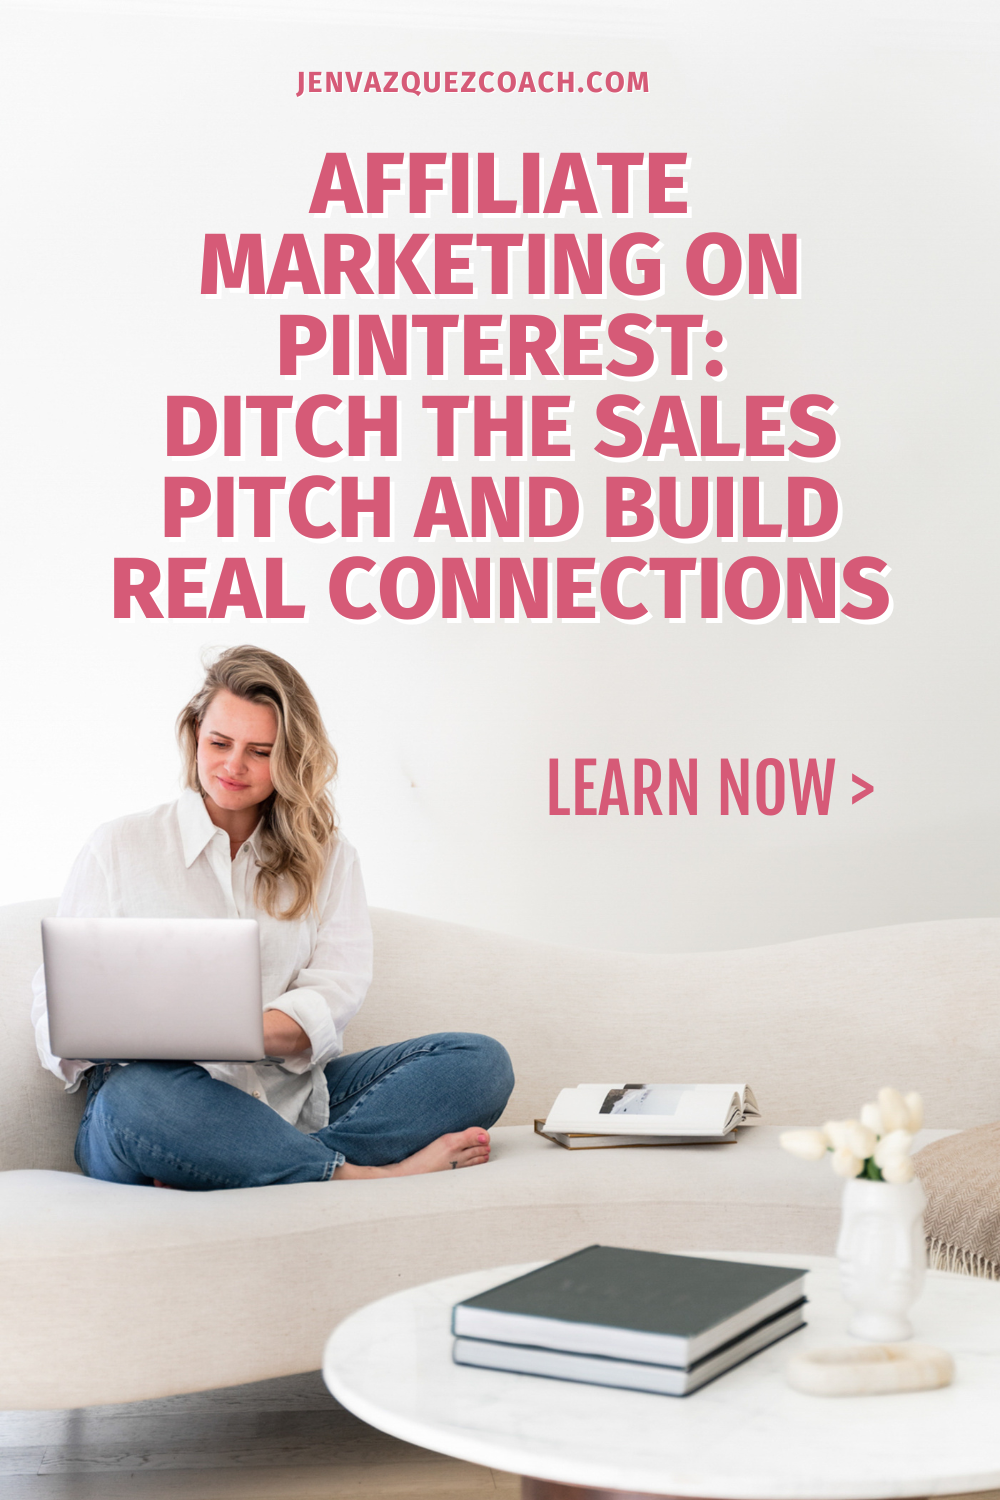 Today, we're jumping into the fabulous world of affiliate marketing on Pinterest. Whether you're a newbie or a seasoned pro, it's time to forget what you think you know about affiliate marketing and embrace a fresh, more genuine approach. by Jen Vazquez Media jenvazquezcoach.com